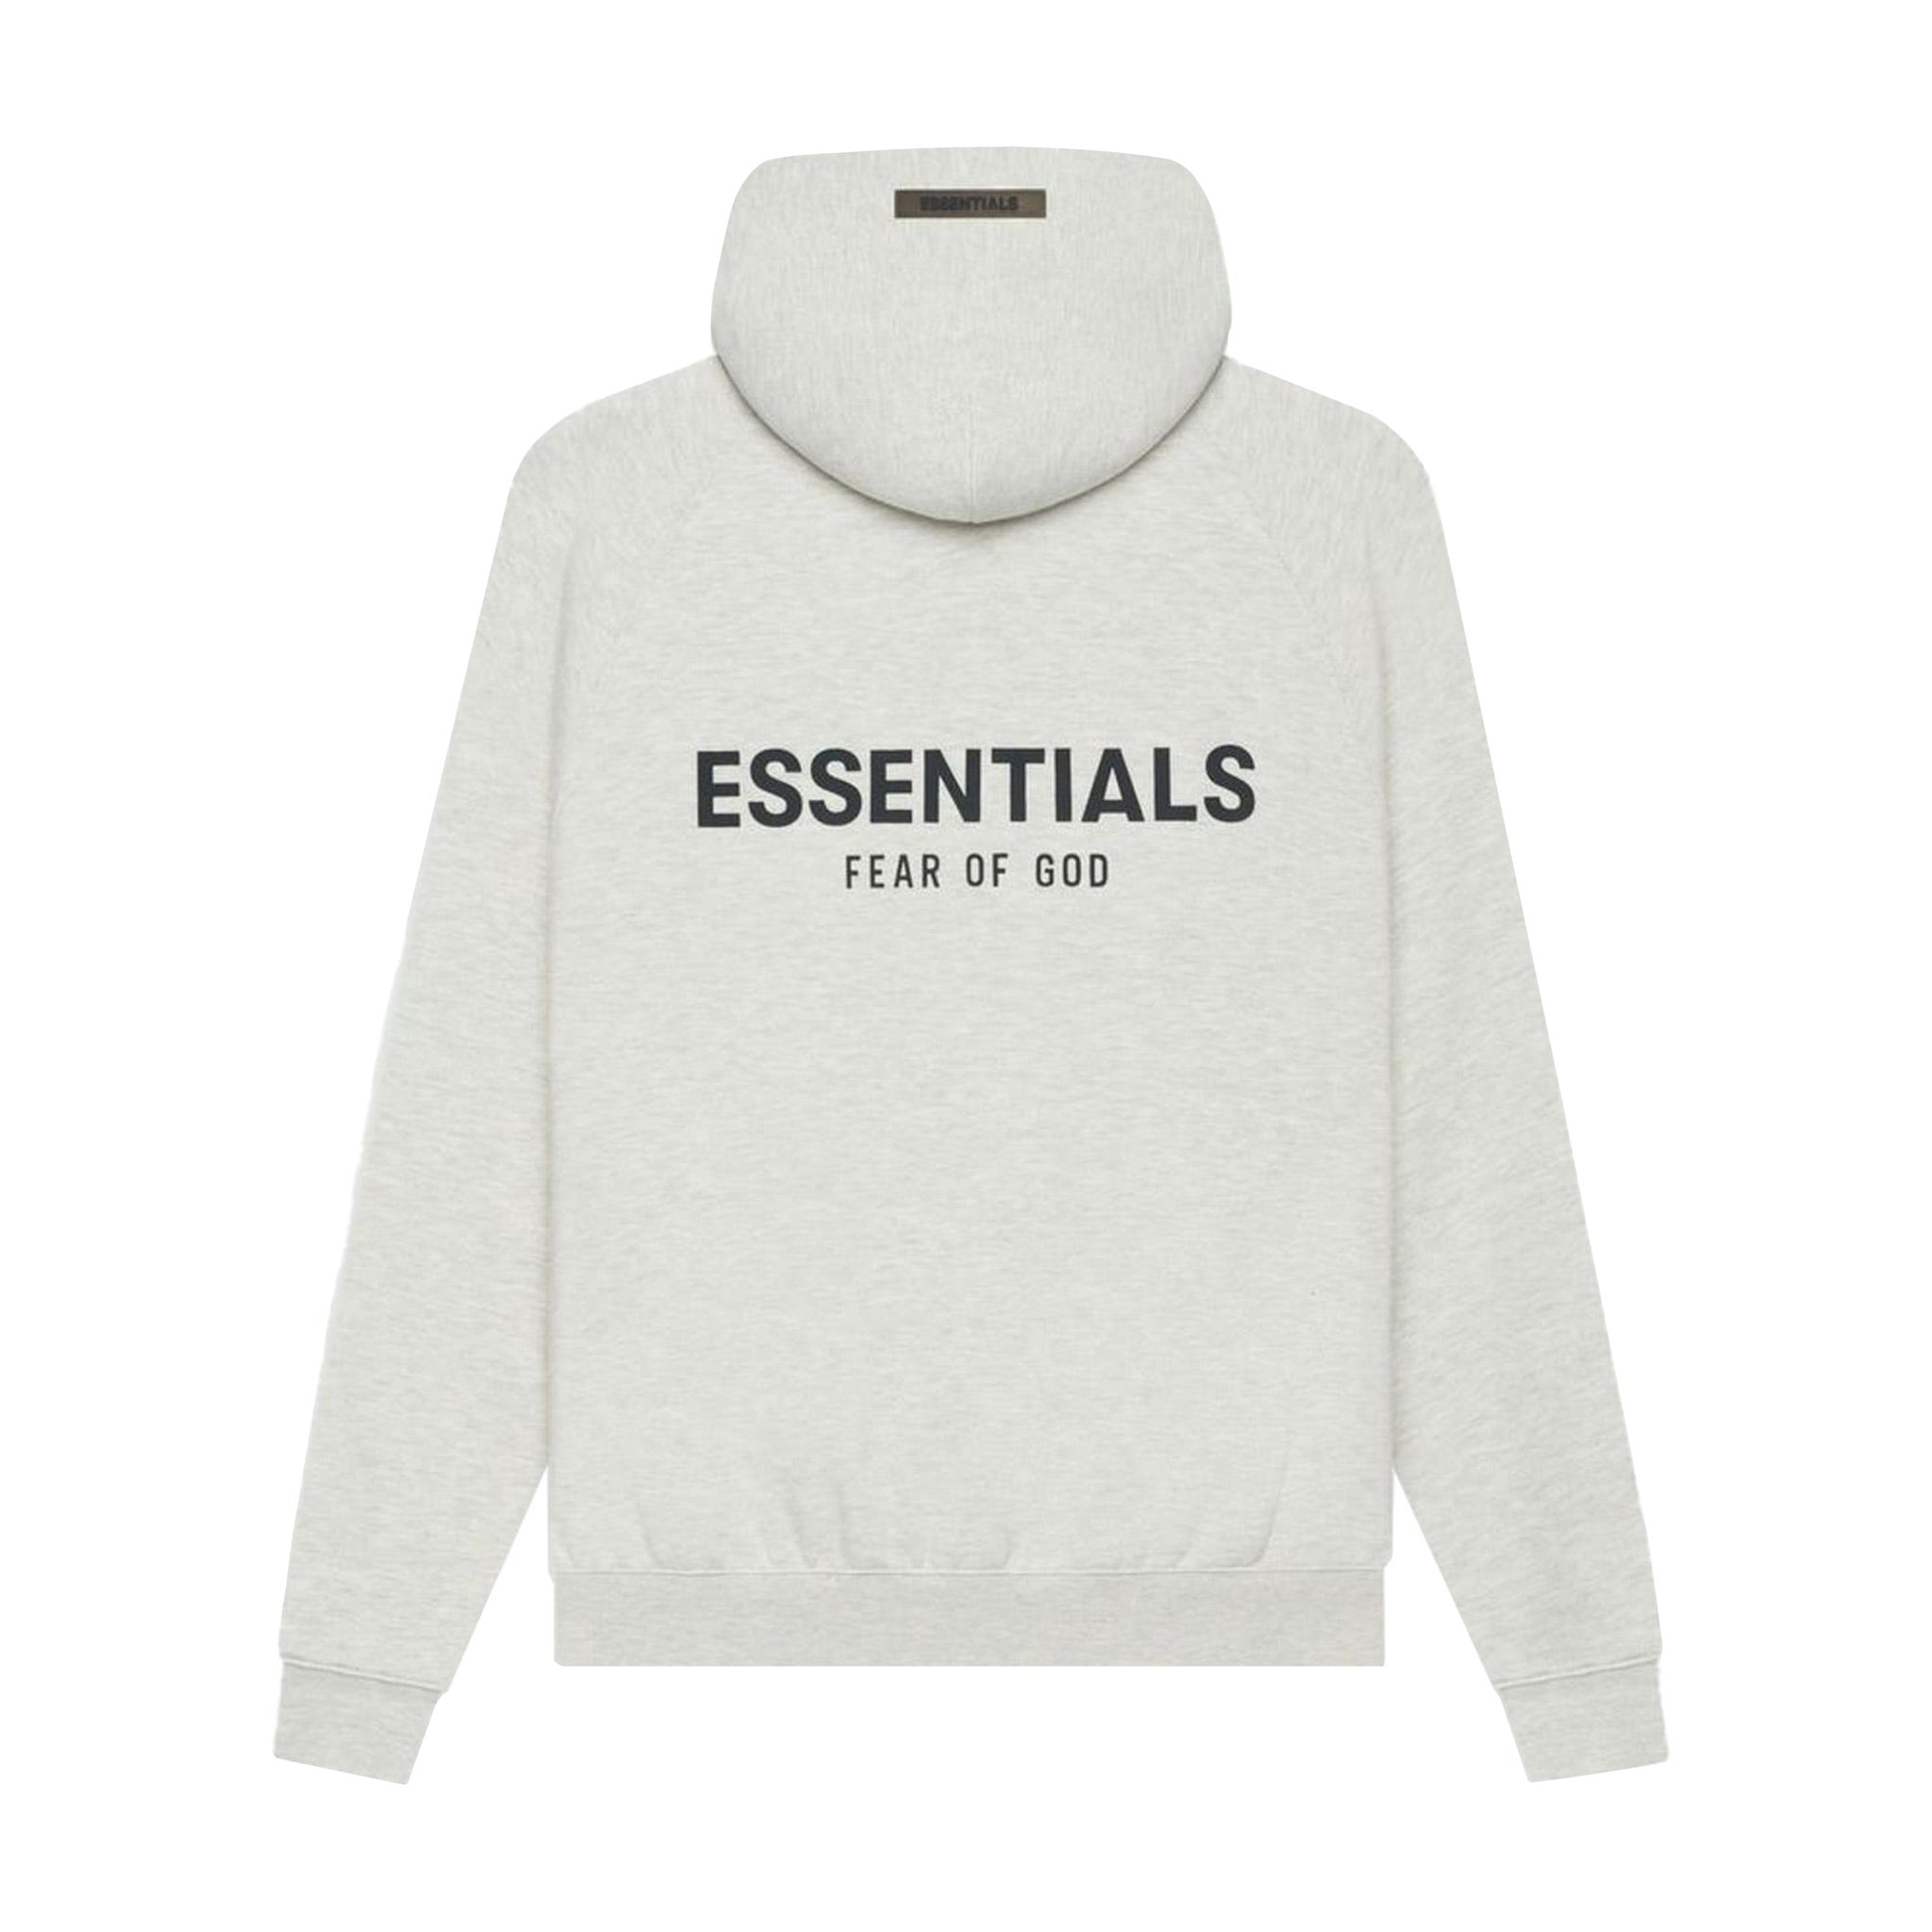 Fear Of God Essentials Pullover Hoodie SS21 - Heather Oatmeal BACK | Australia New Zealand